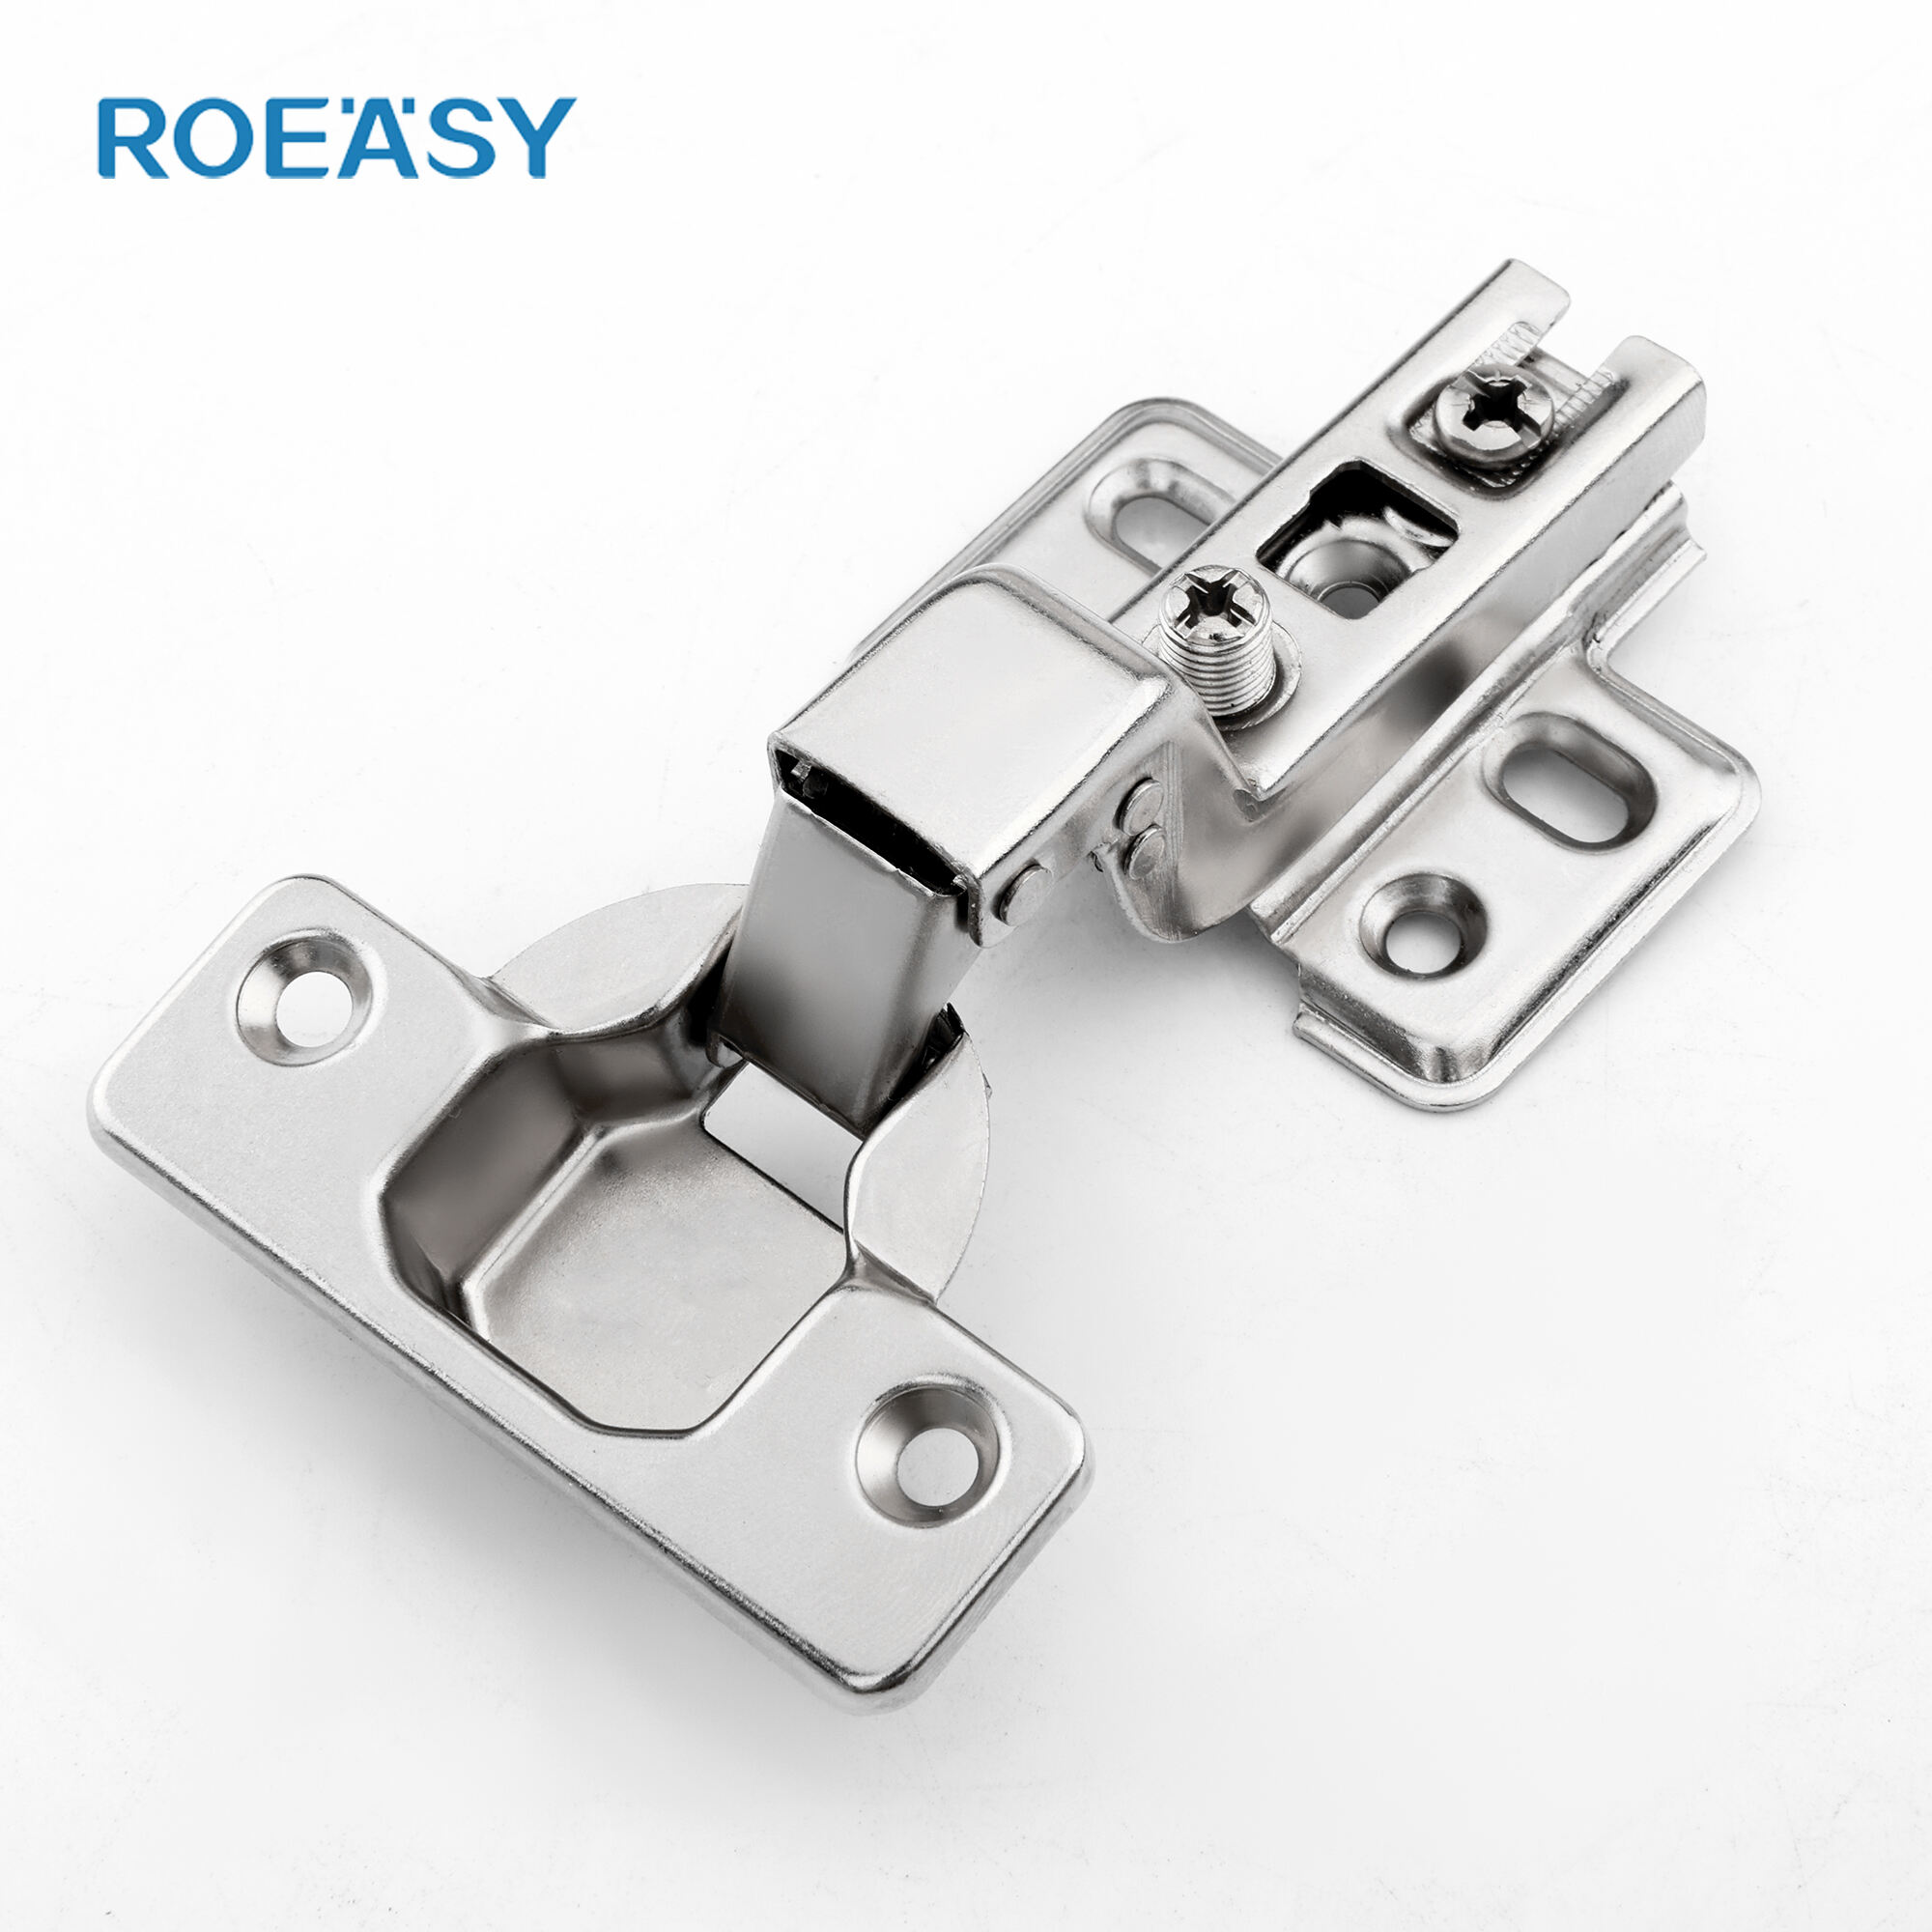 Roeasy CH-251 35 mm Cup 110 degree one way hinge slide-on cabinet hinge